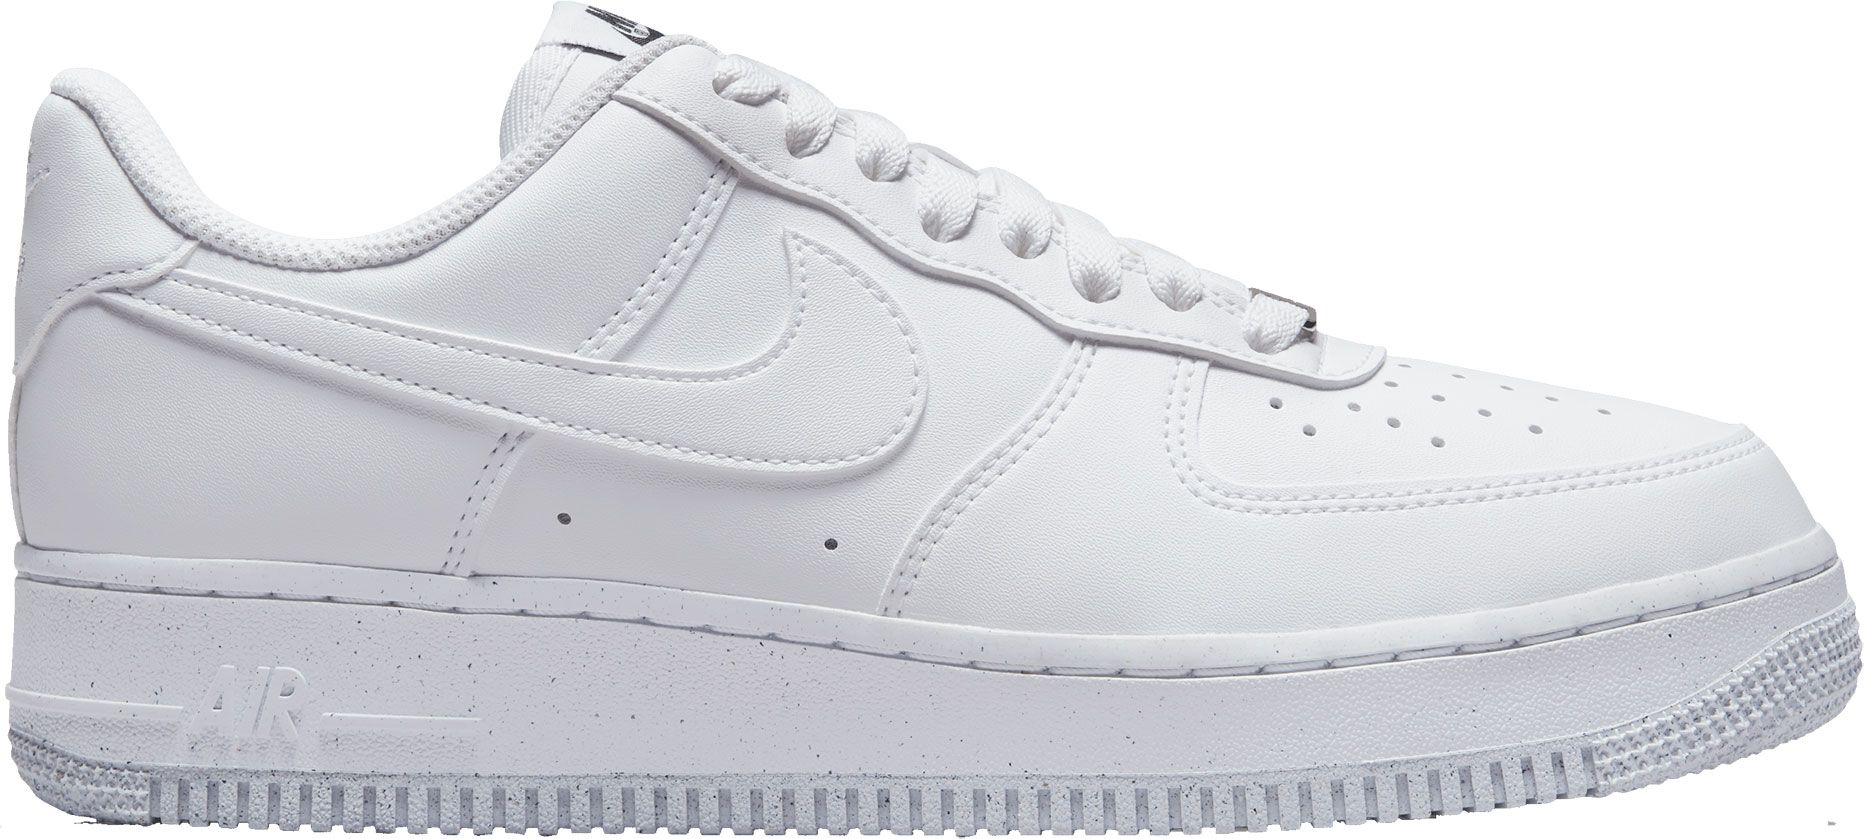 where do they sell nike air force 1 near me